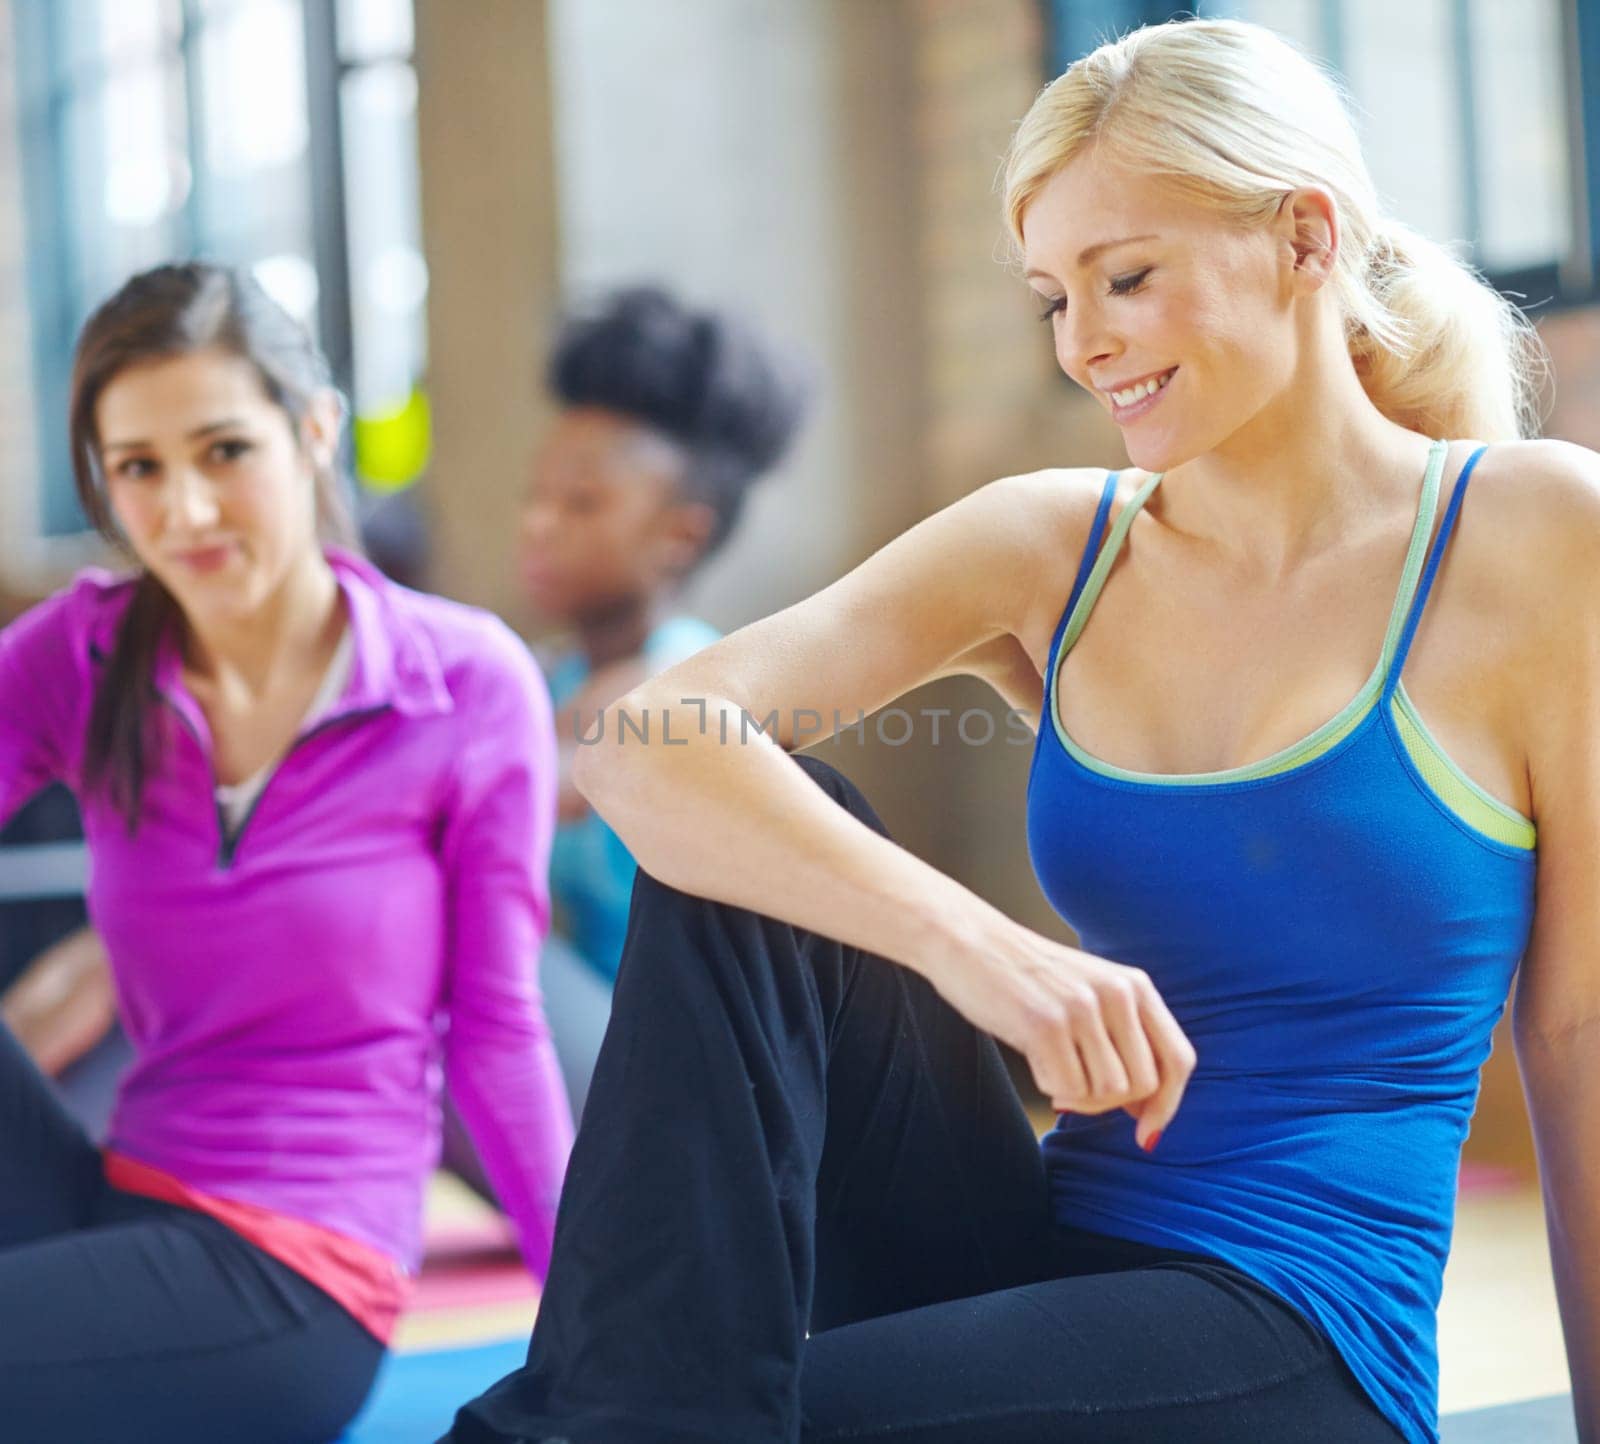 Stretching, fitness and woman in pilates health class for training, exercise and warm up on floor. Smile, muscles and female person getting ready for flexibility workout, yoga or wellness.